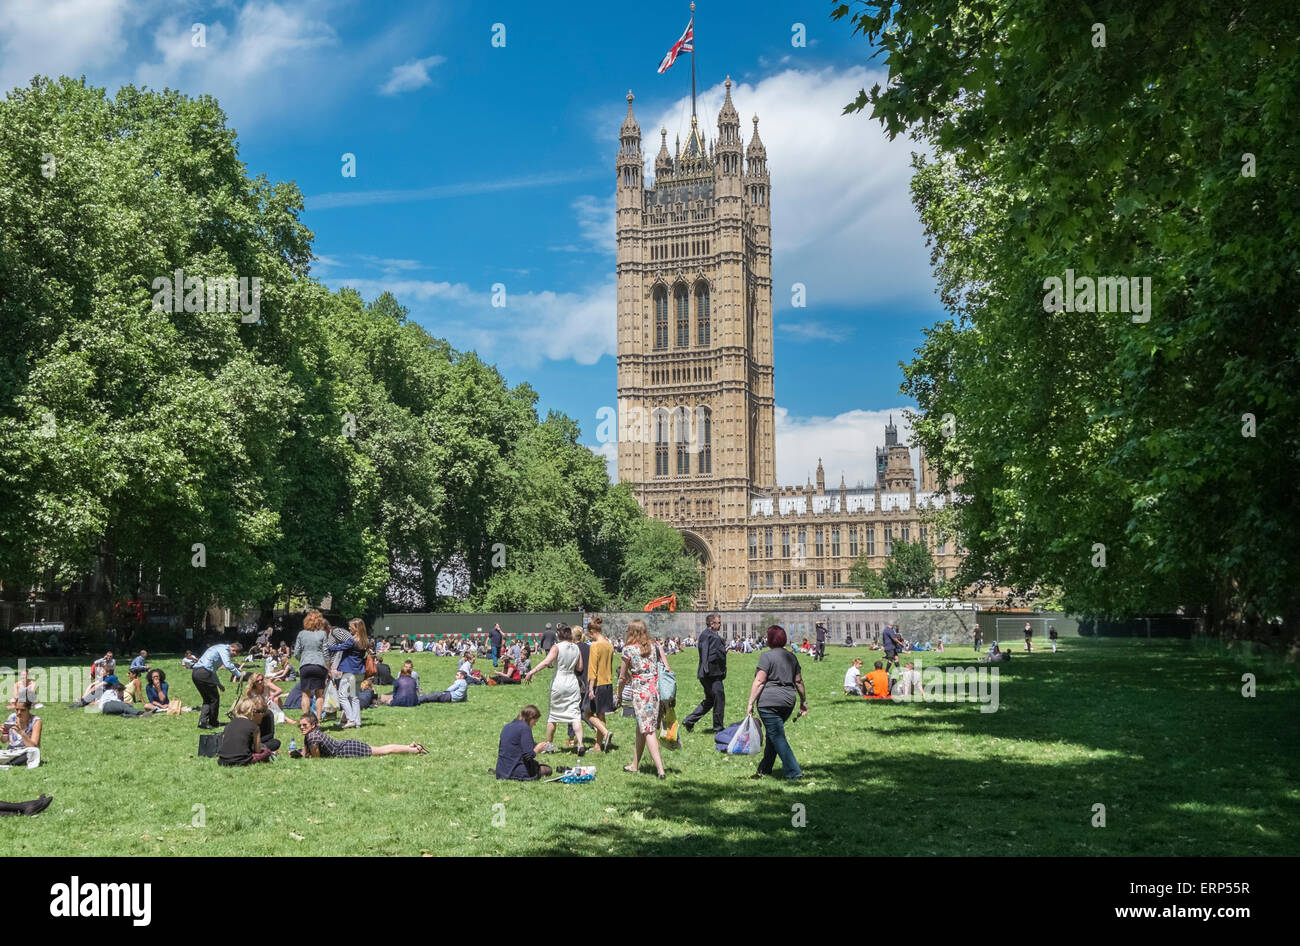 People relaxing in sunshine on a sunny summers day near Houses of Parliament, Victoria Tower Gardens, Westminster, London UK Stock Photo